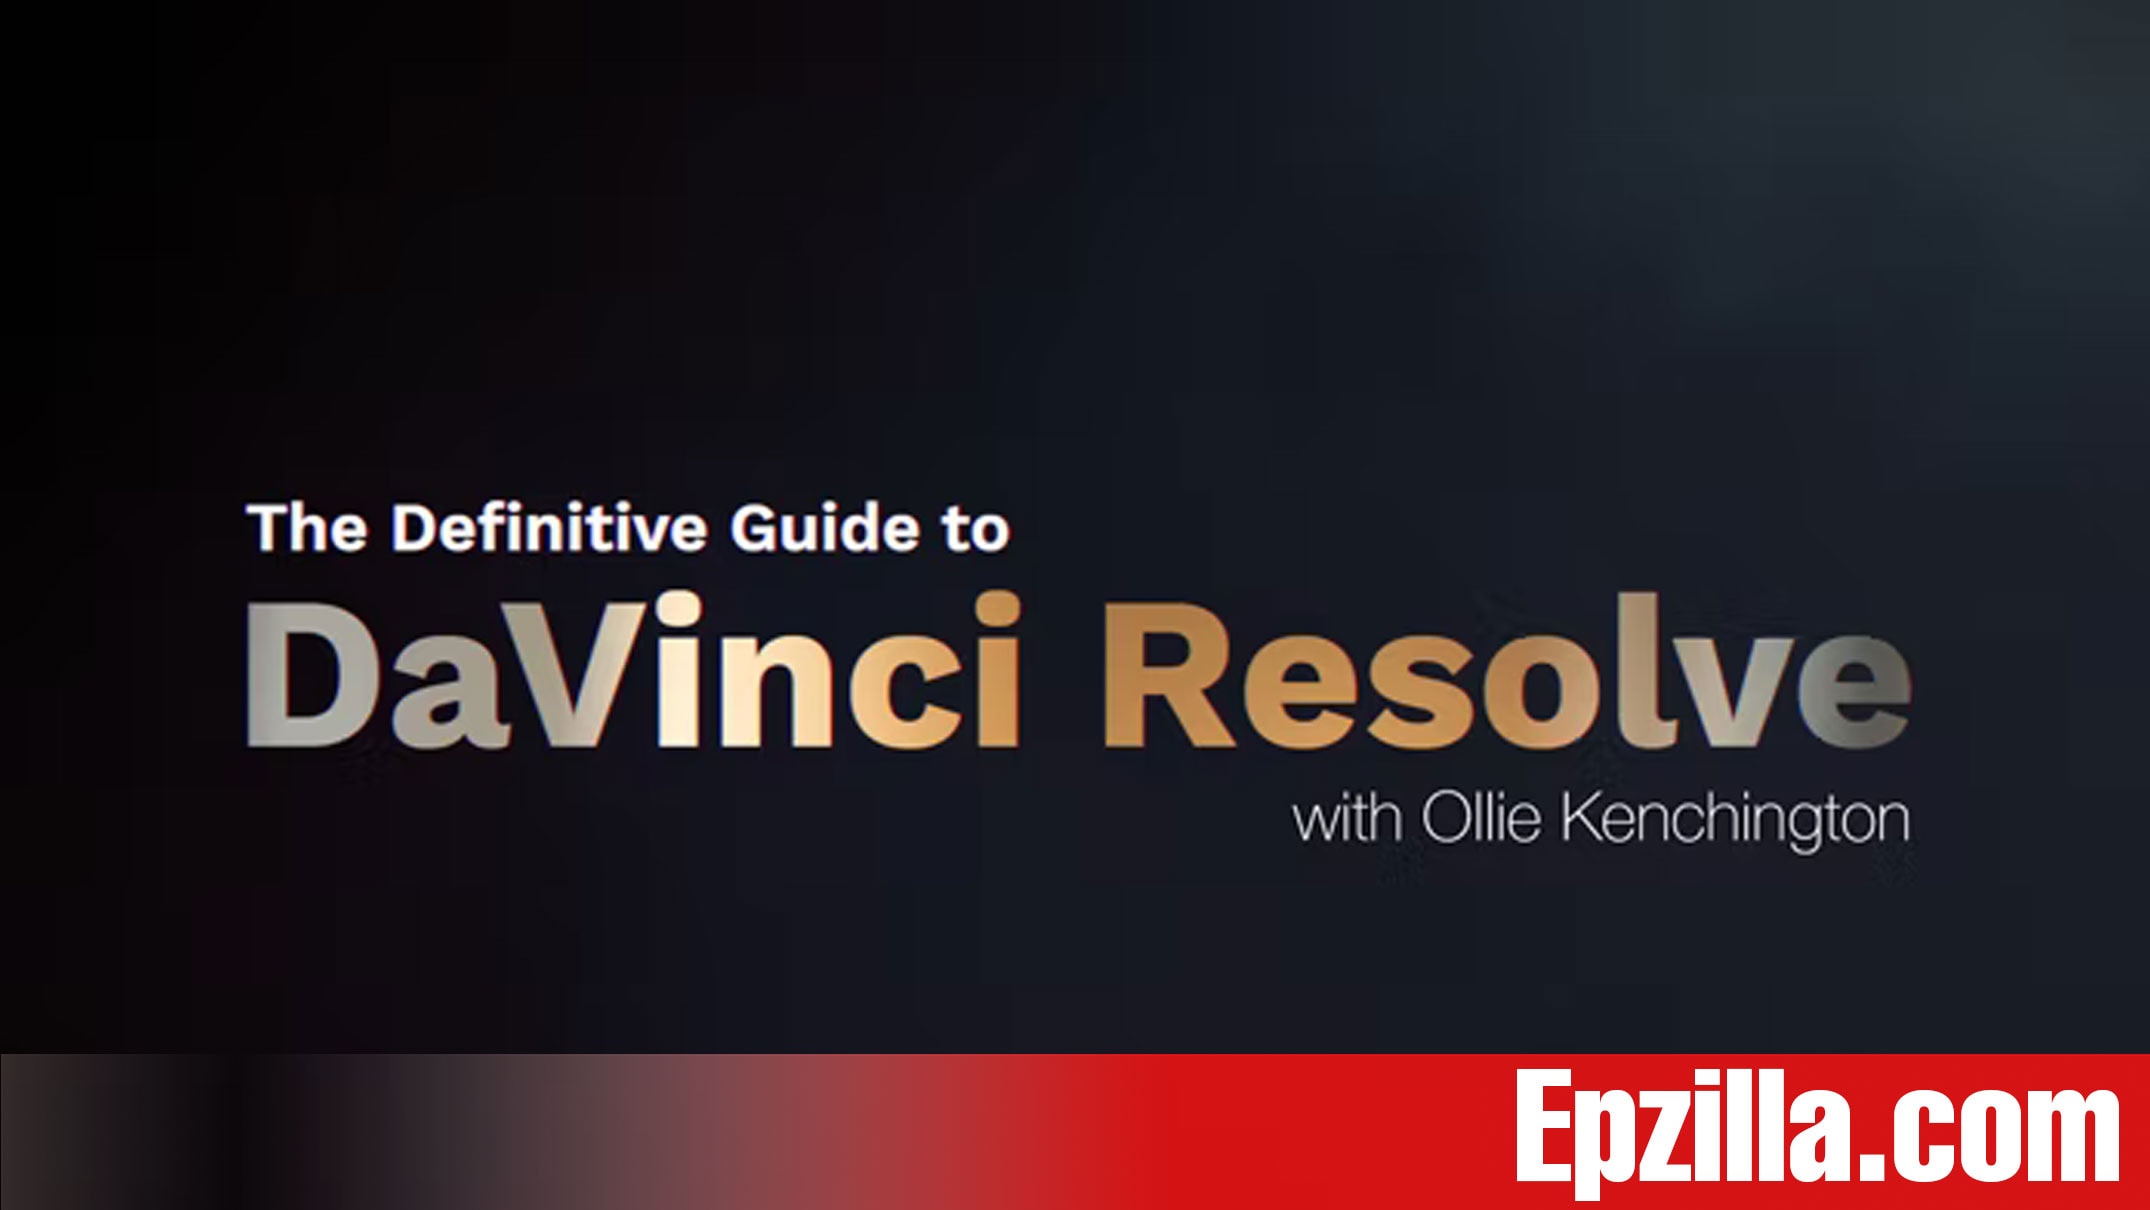 MZed The Definitive Guide to DaVinci Resolve Free Download